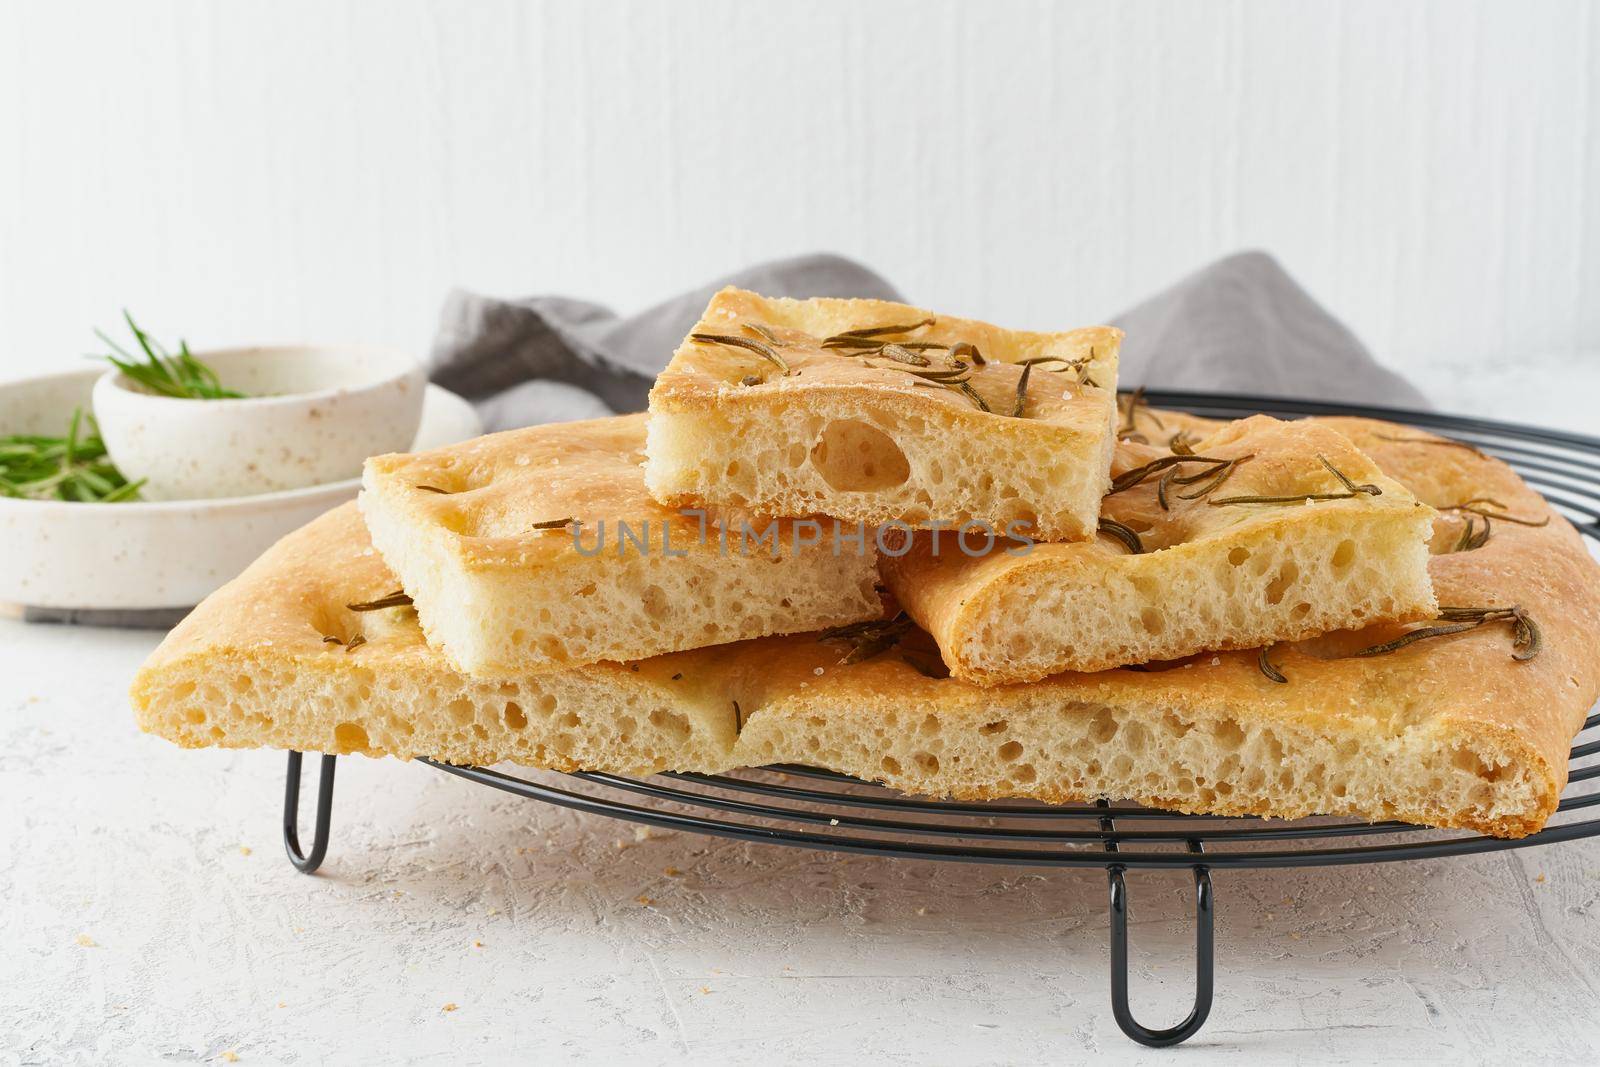 Focaccia, pizza, italian flat bread with rosemary and olive oil on grid by NataBene